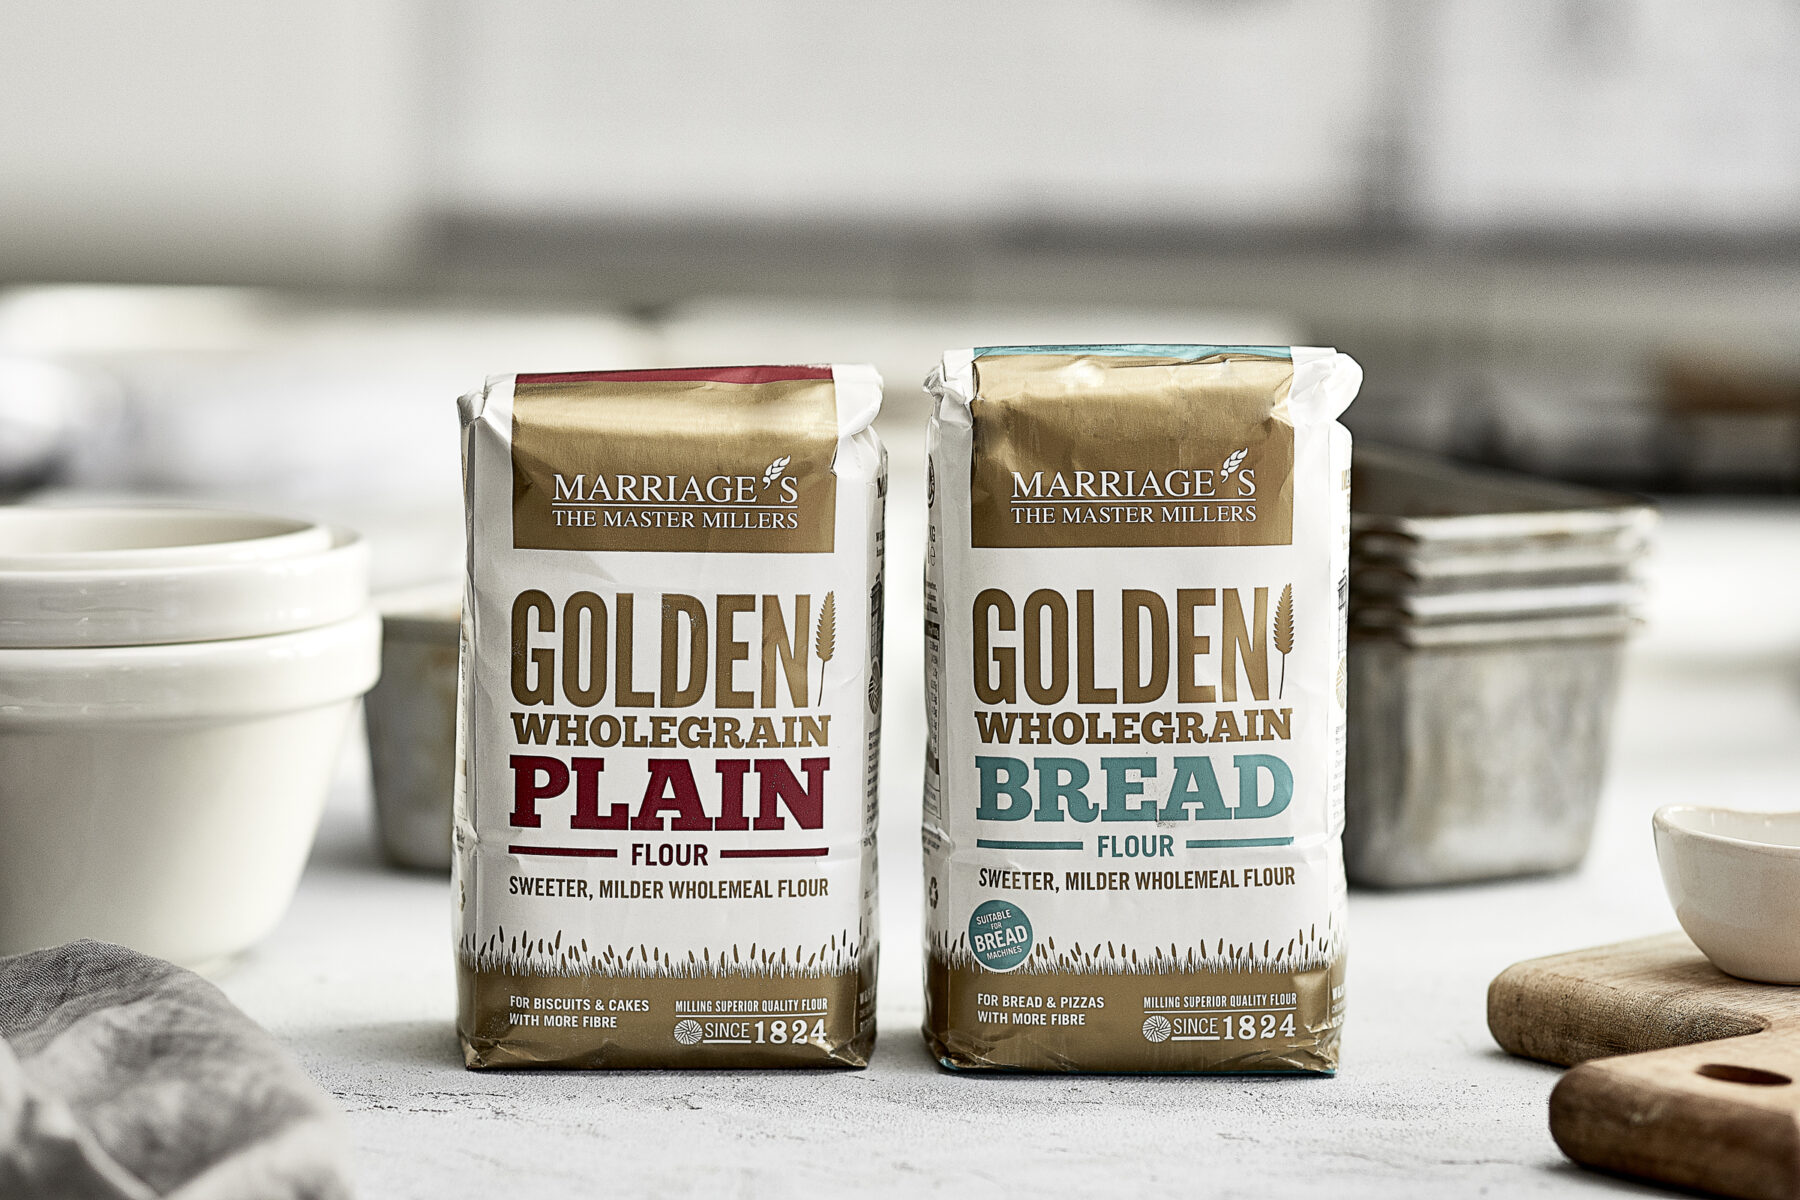 Image of two bags of Marriage's golden flour in gold and white bags